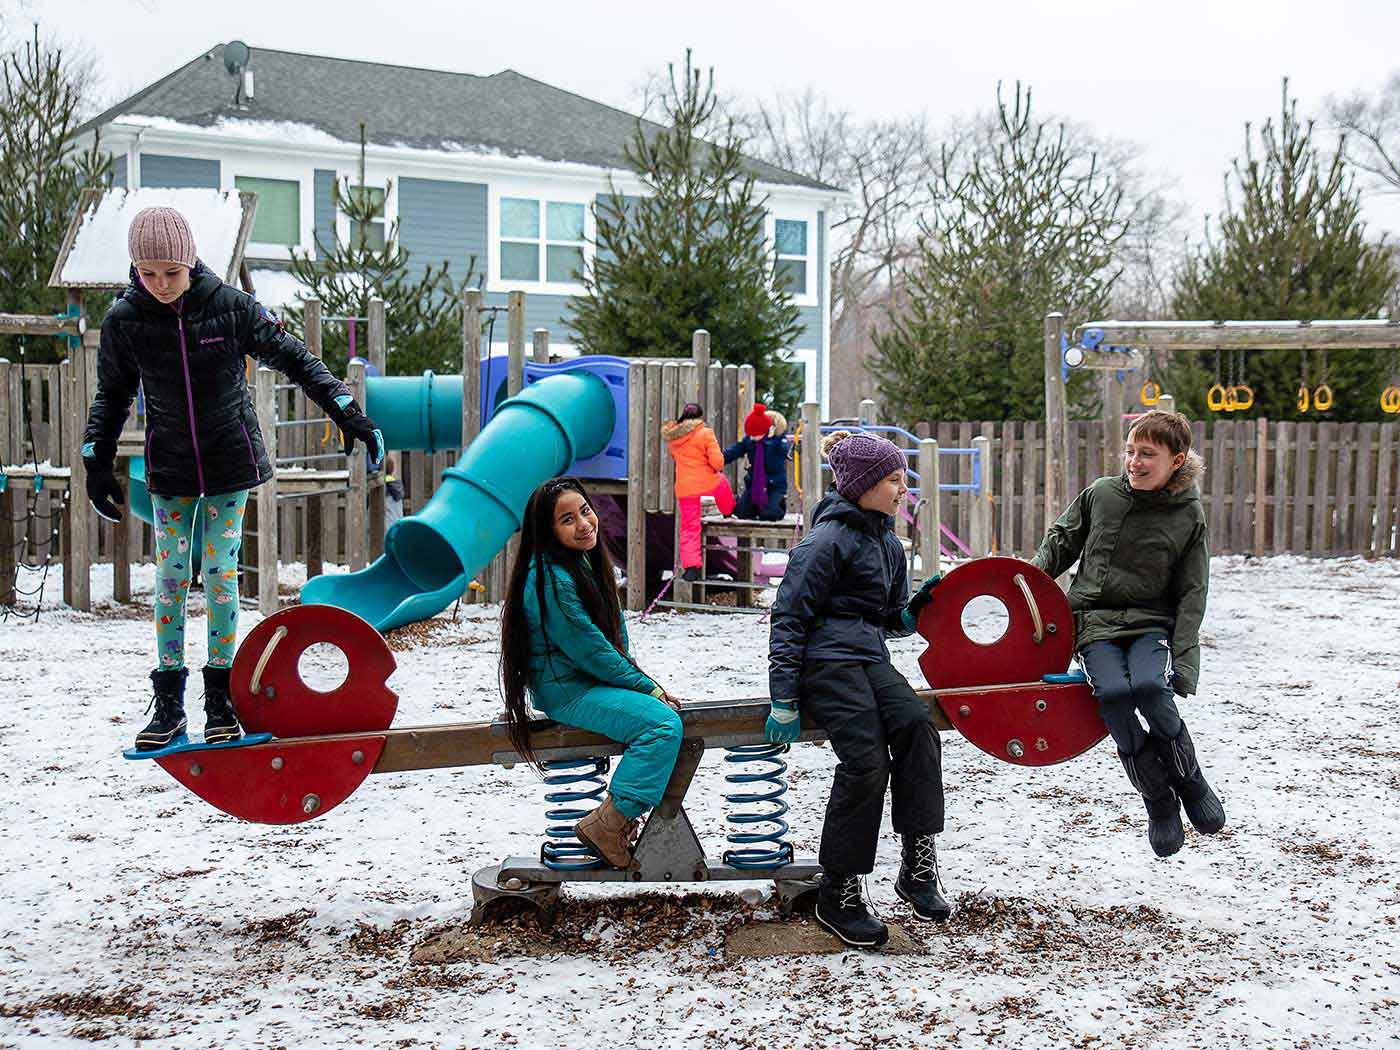 Baker students enjoy access to two playgrounds each day